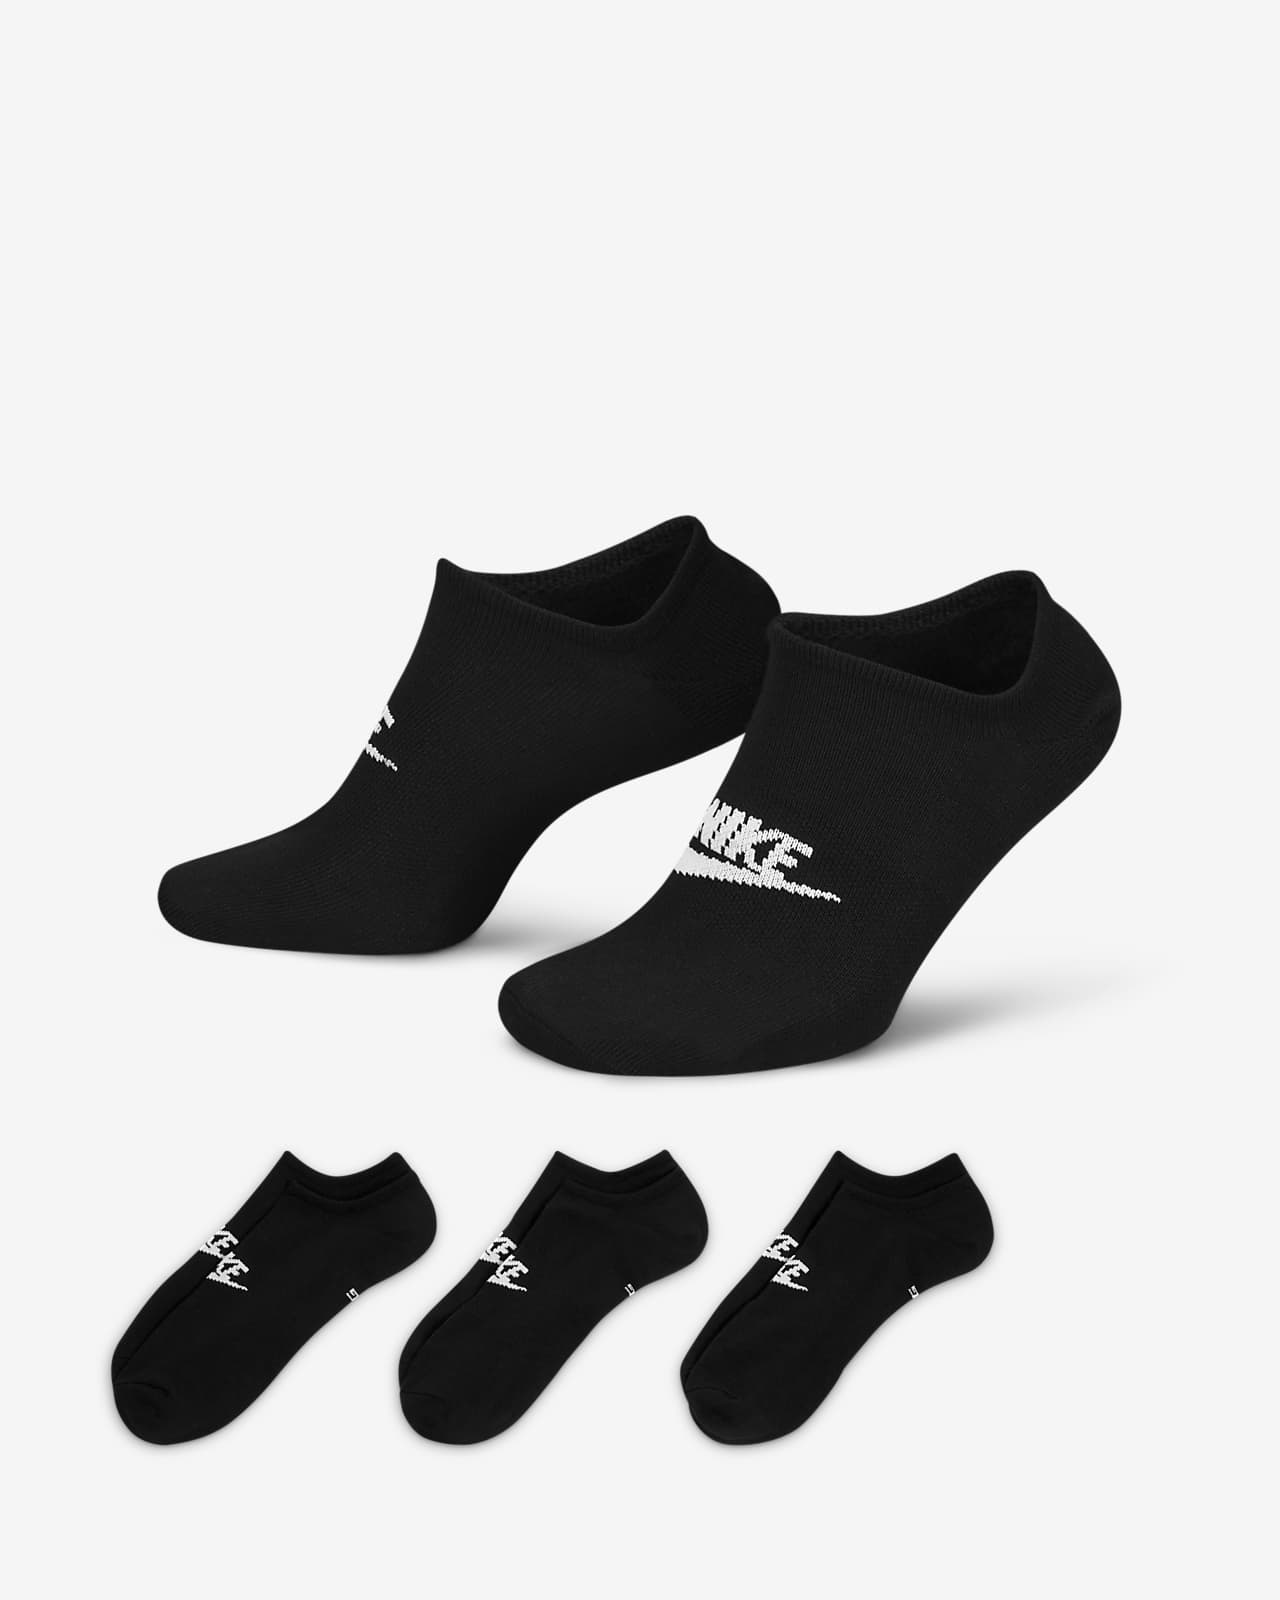 Nike Sportswear Everyday Essential Calcetines invisibles (3 pares)